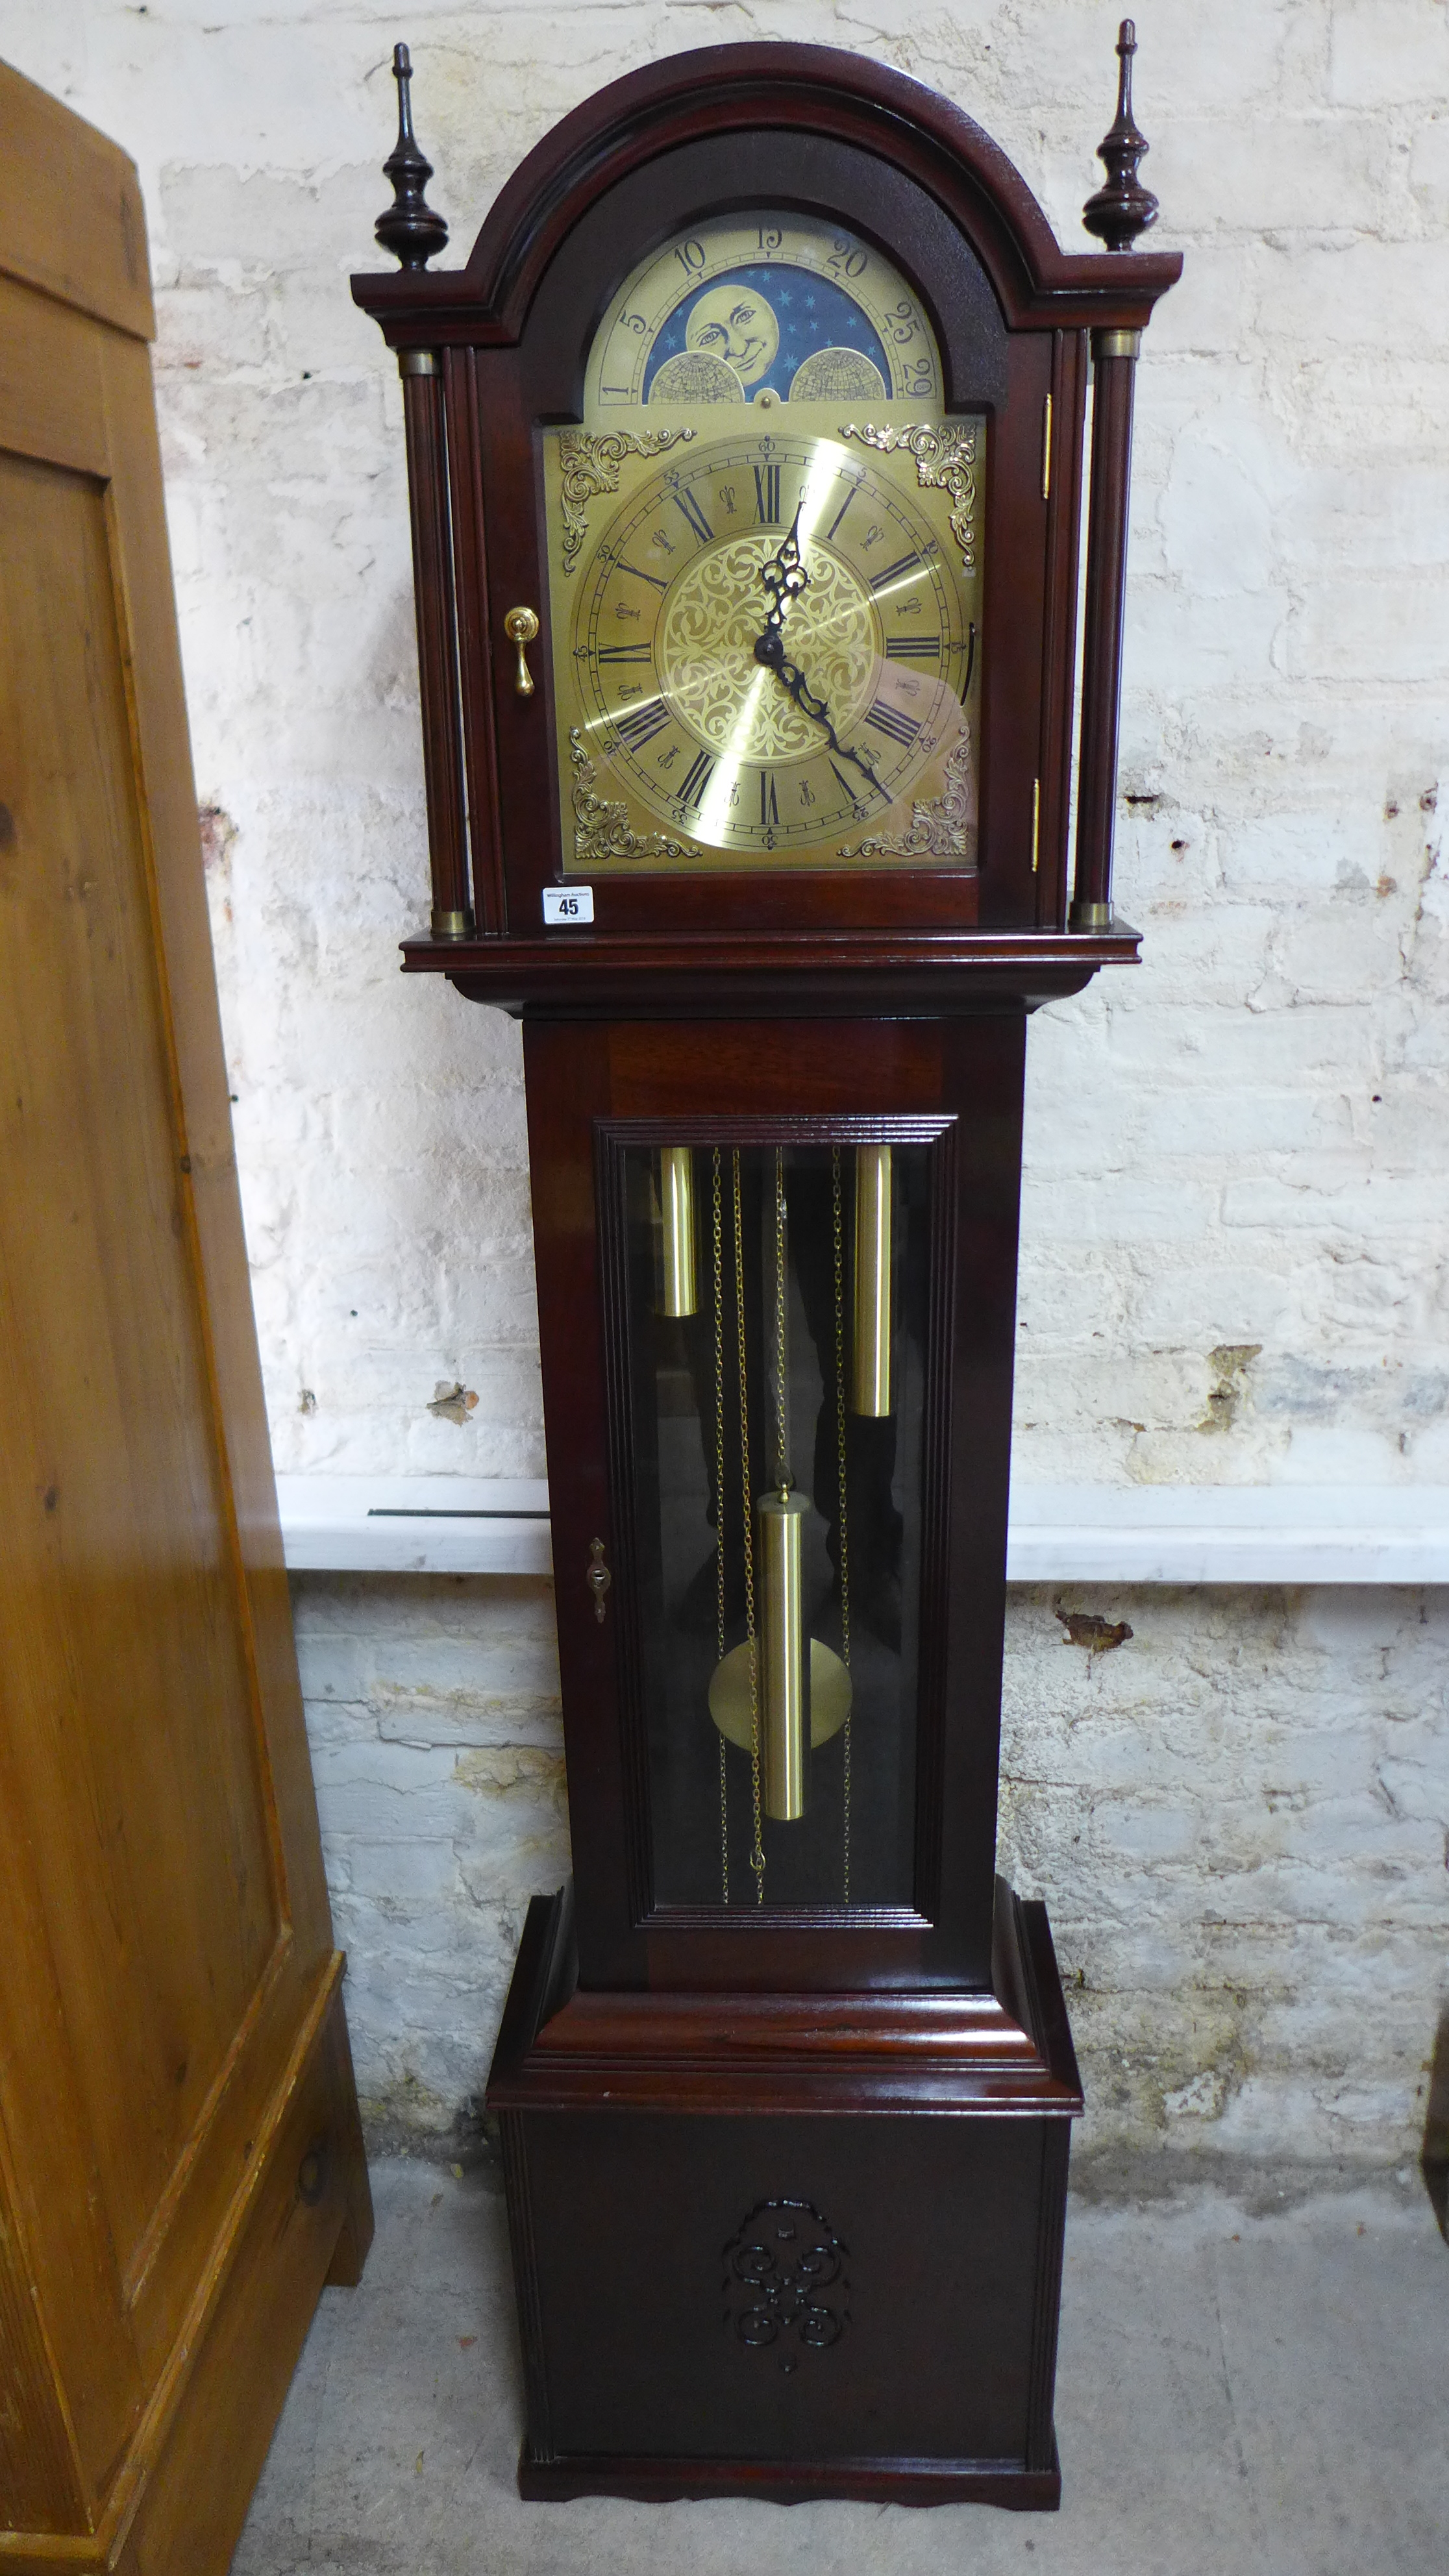 A modern mahogany longcase clock with a three train movement - working in the sale room